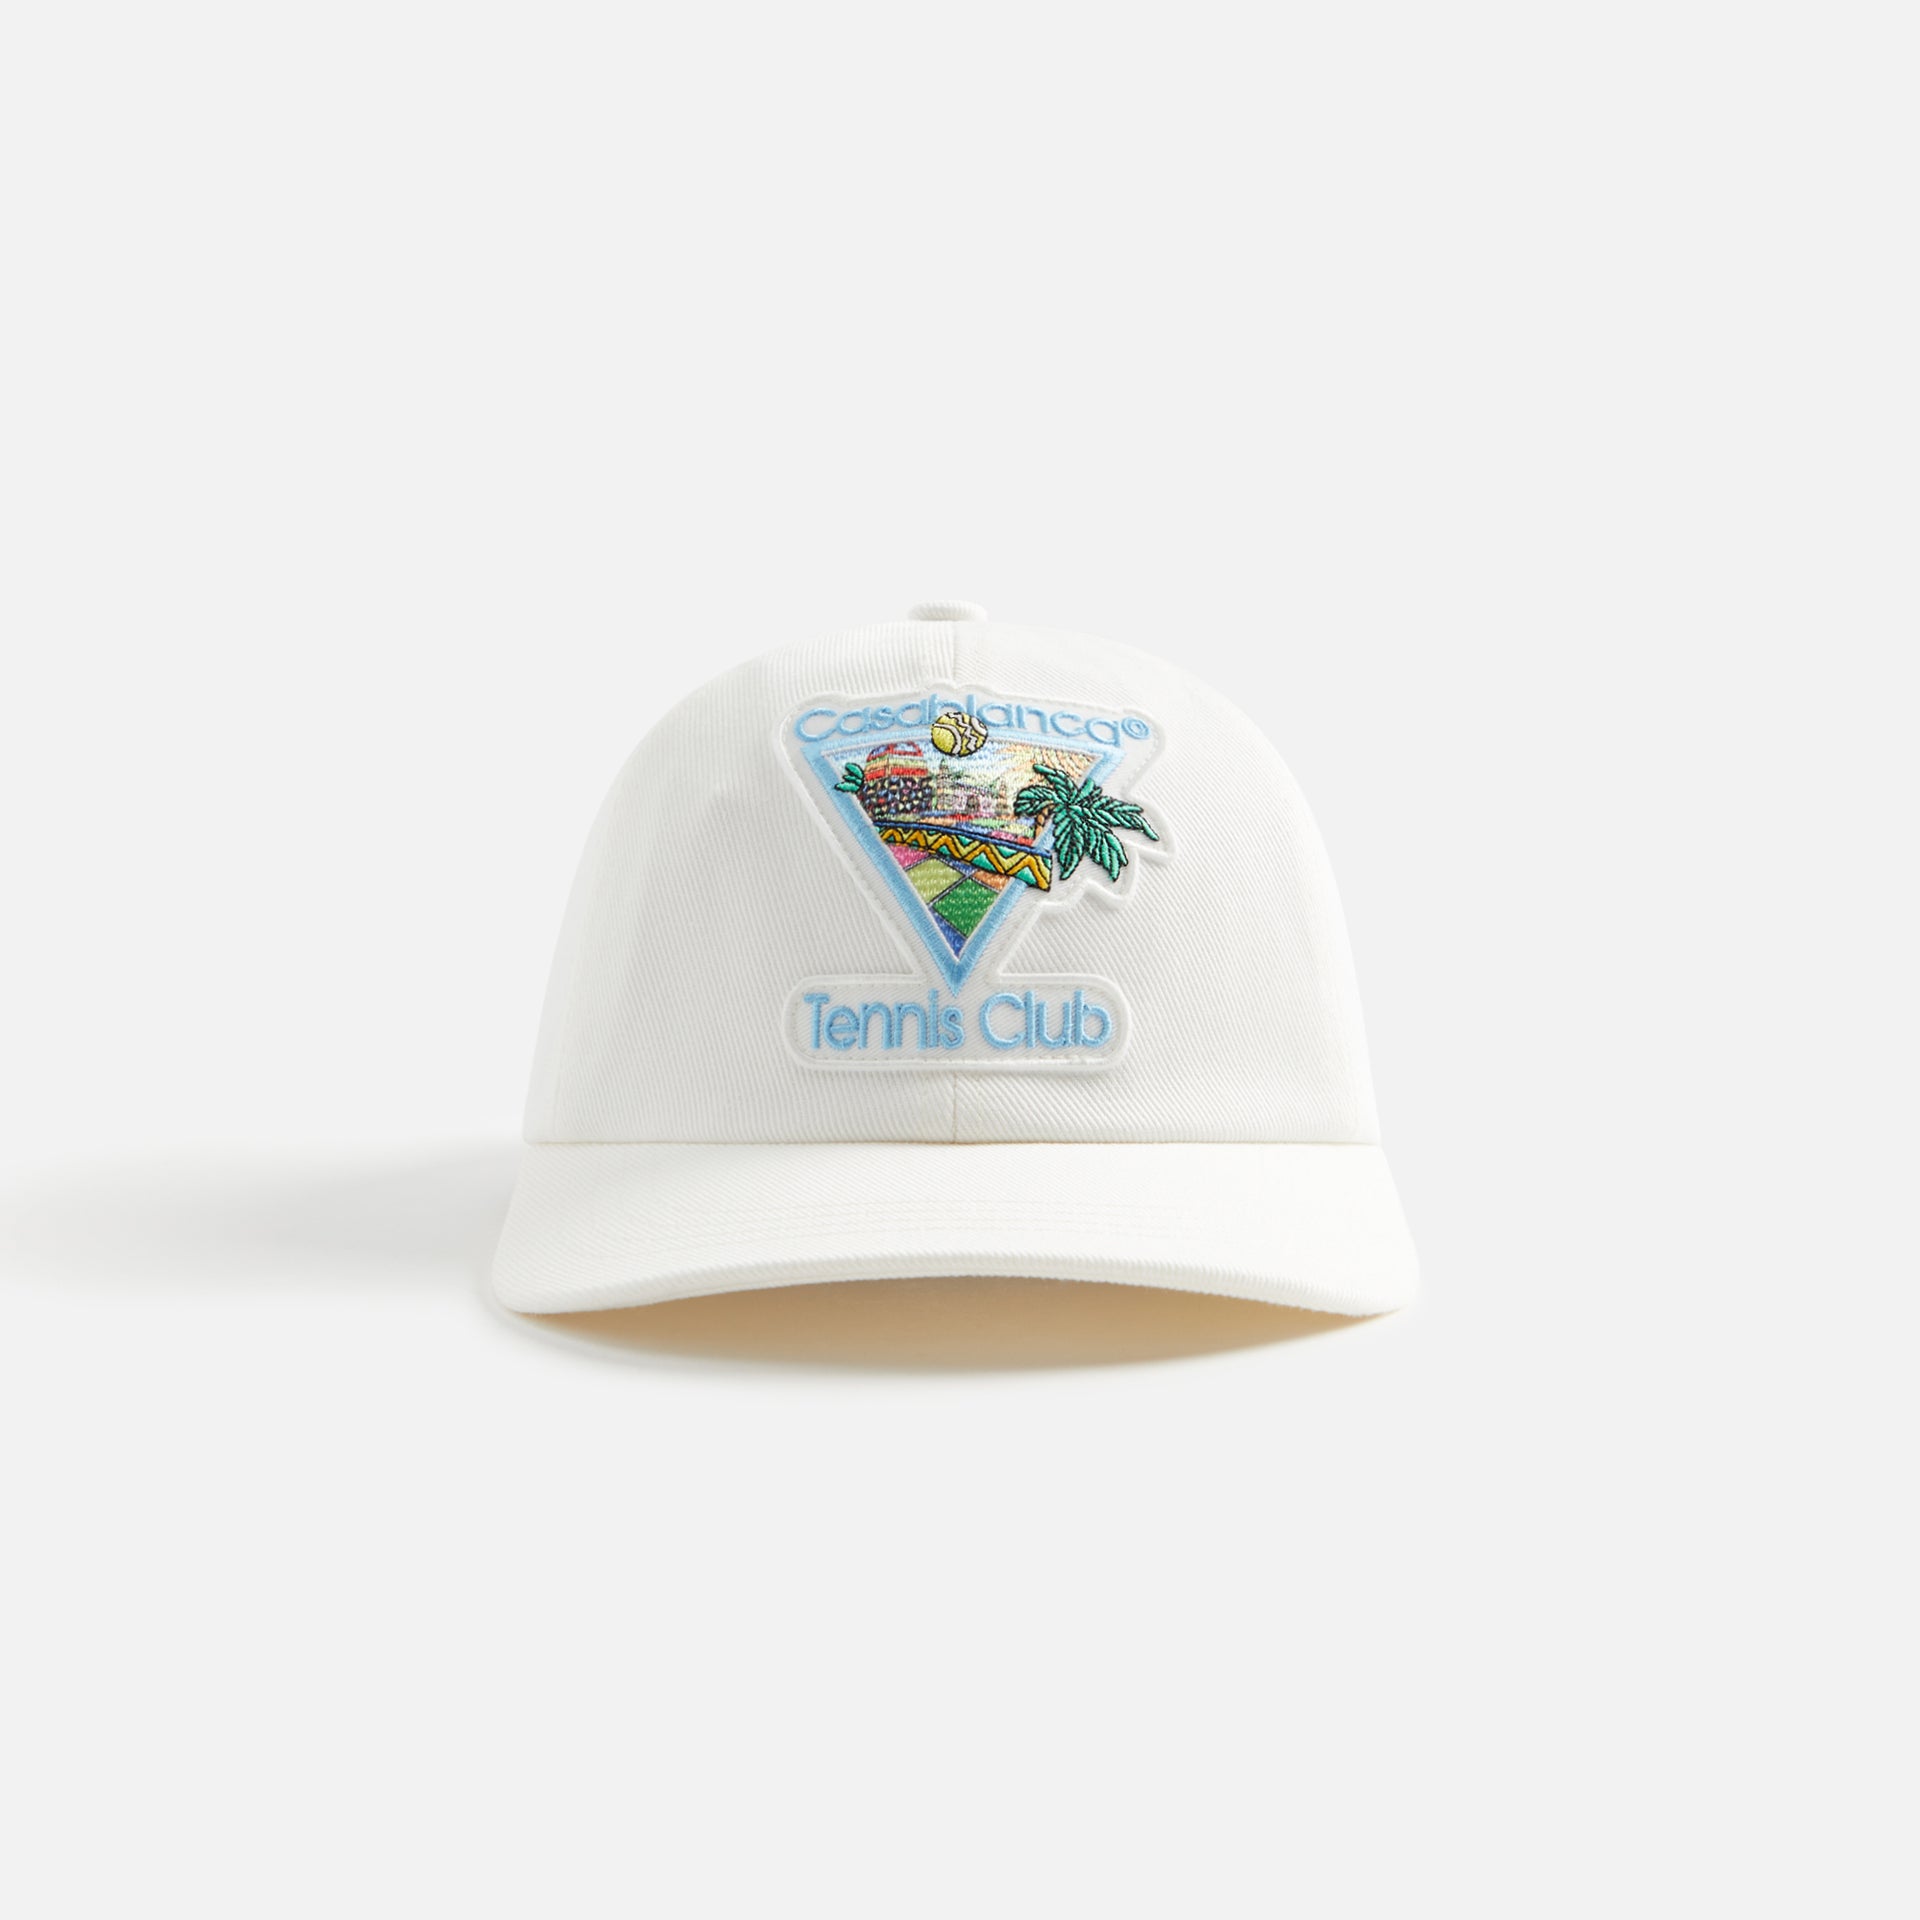 Casablanca Afro Cubismo Tennis Club Embroidered Patch Cap - White